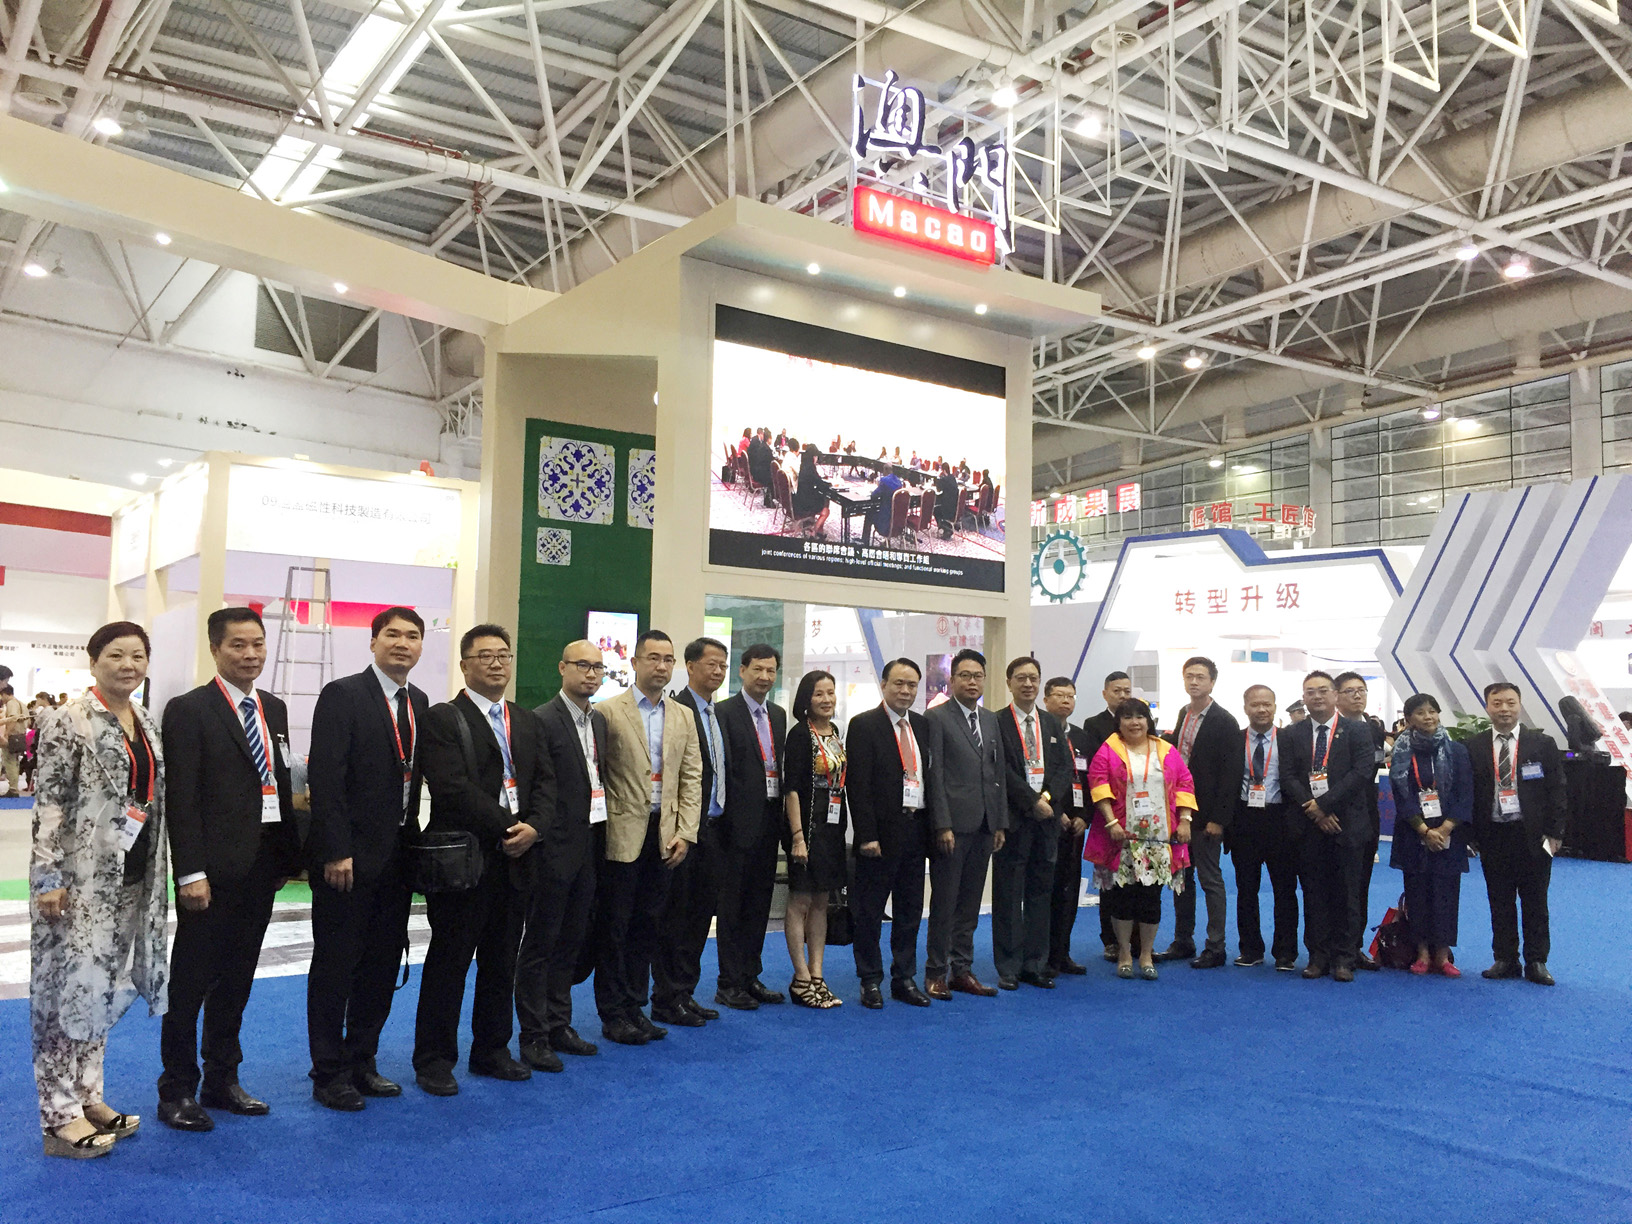 IPIM sets up a Macao Pavilion at the 15th China Cross-Straits Technology and Projects Fair (18-21 June 2017)